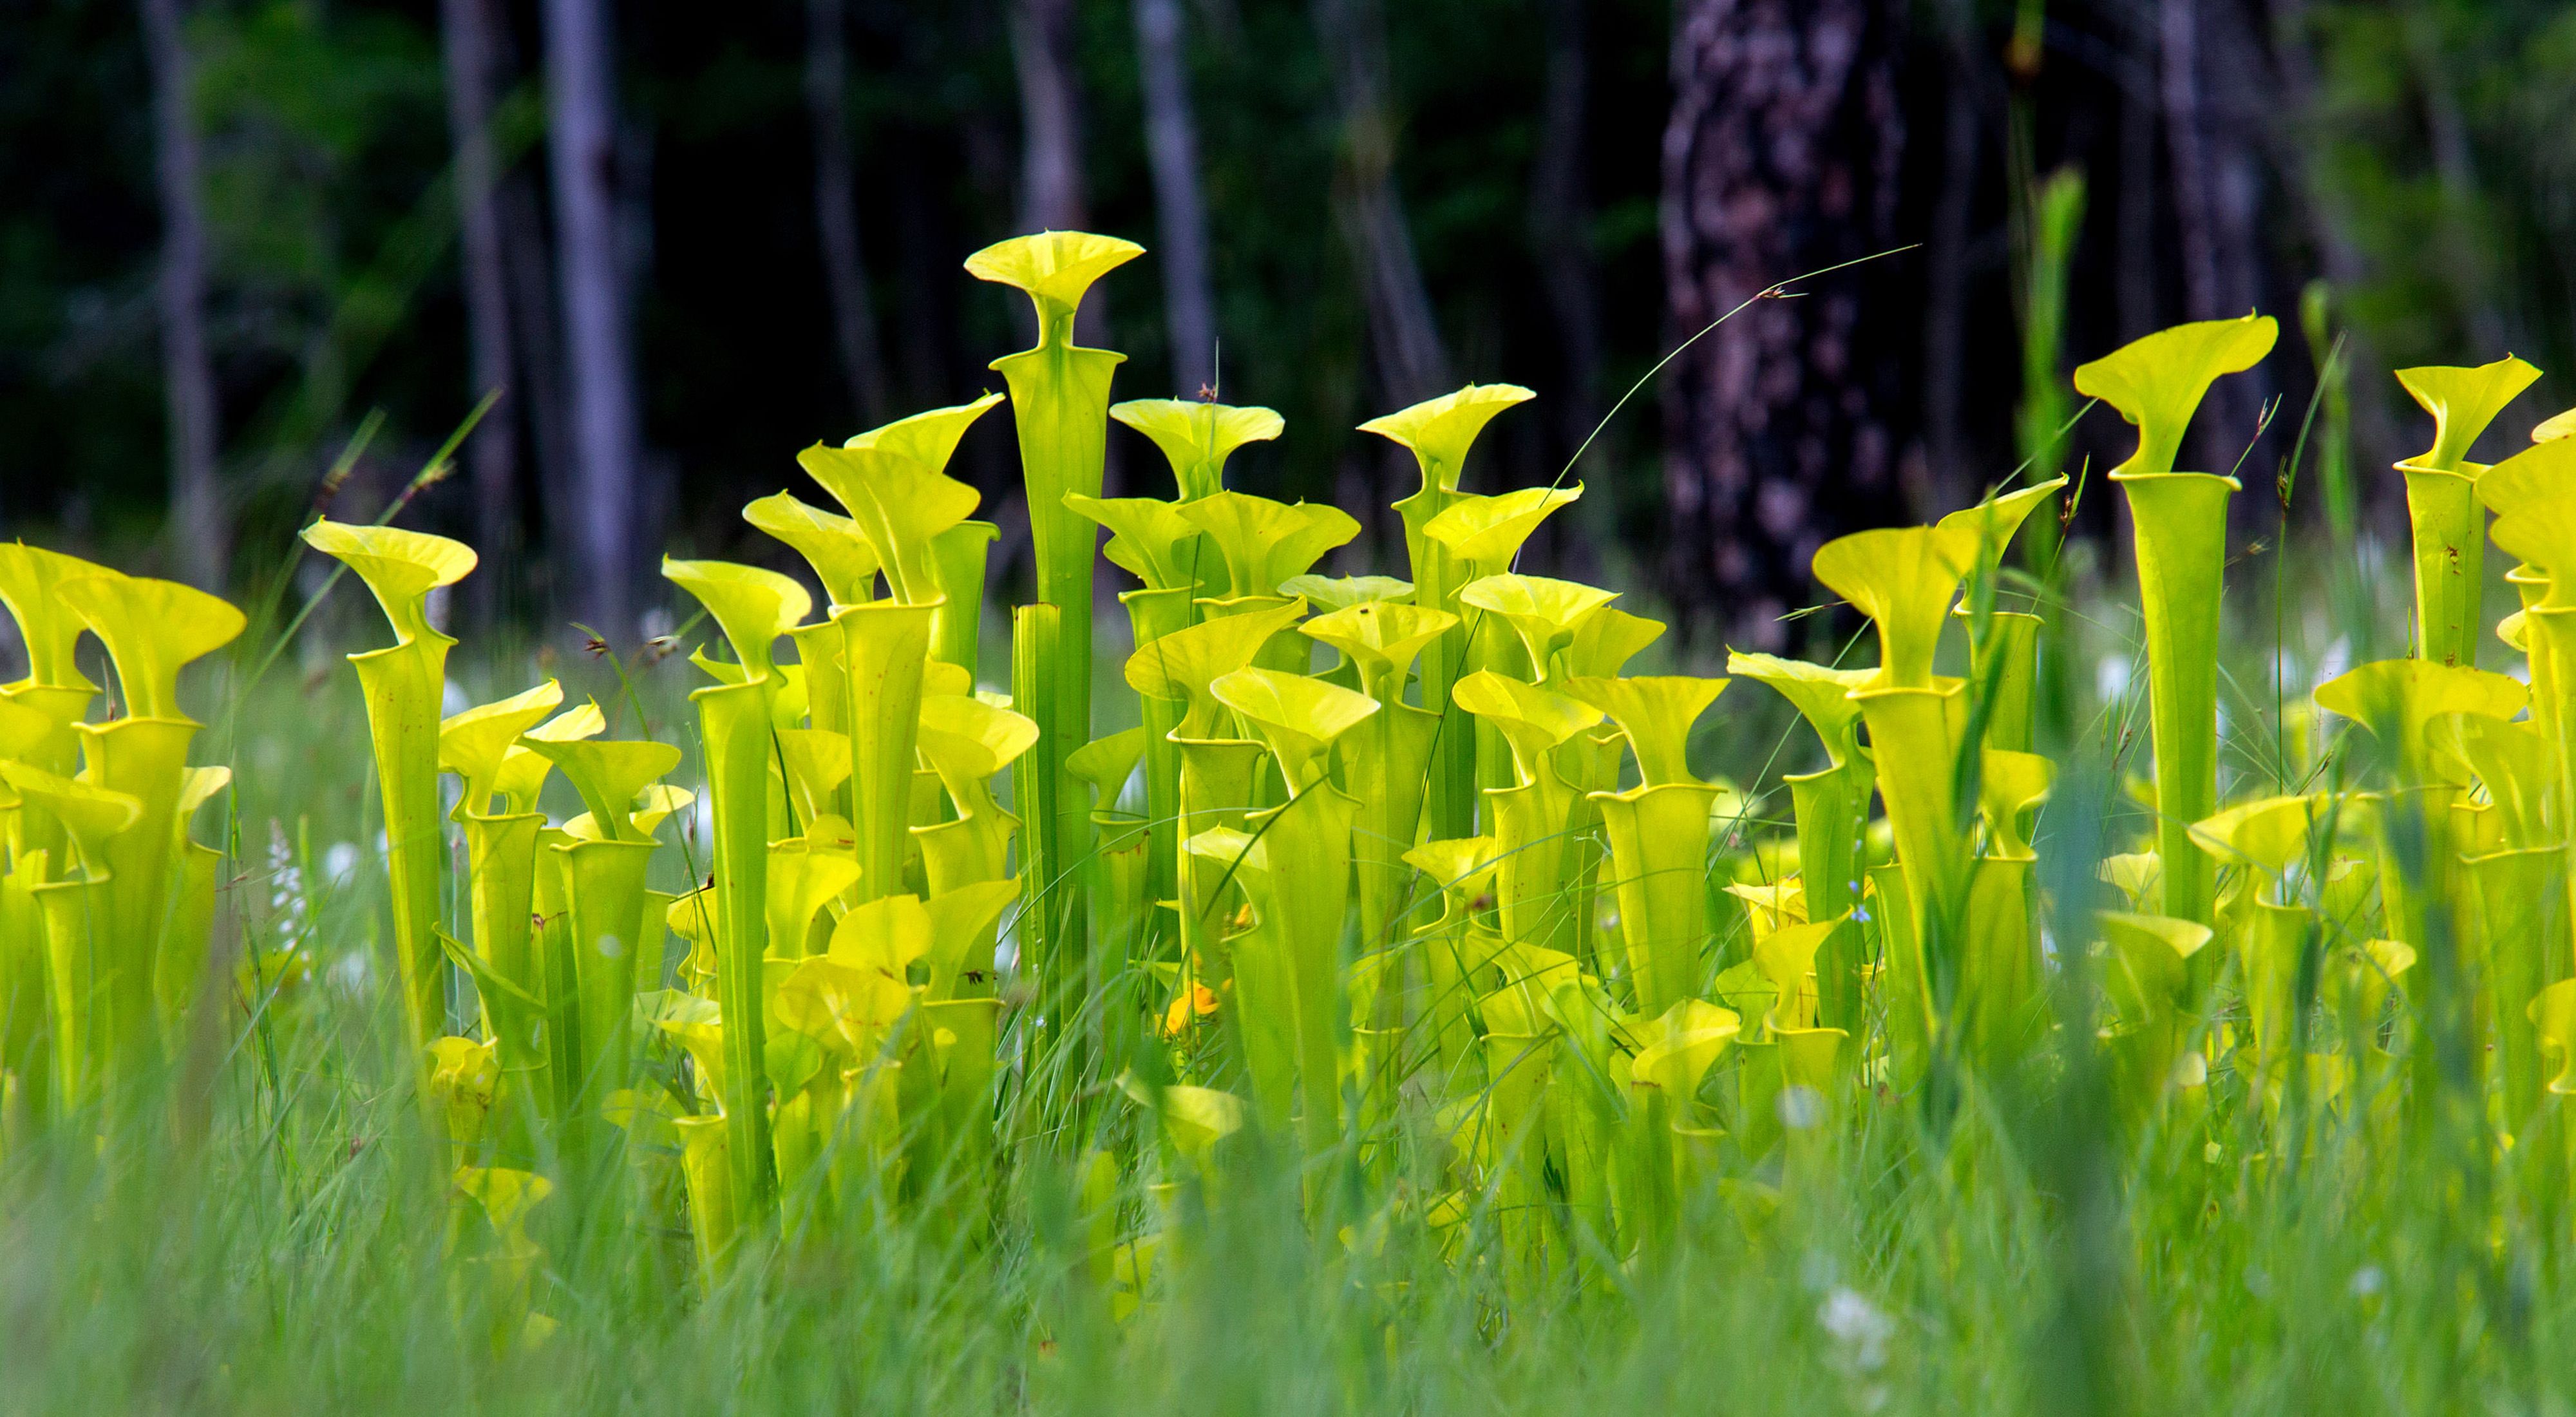 Densely packed tall green and yellow pitchers of the yellow pitcher plant.